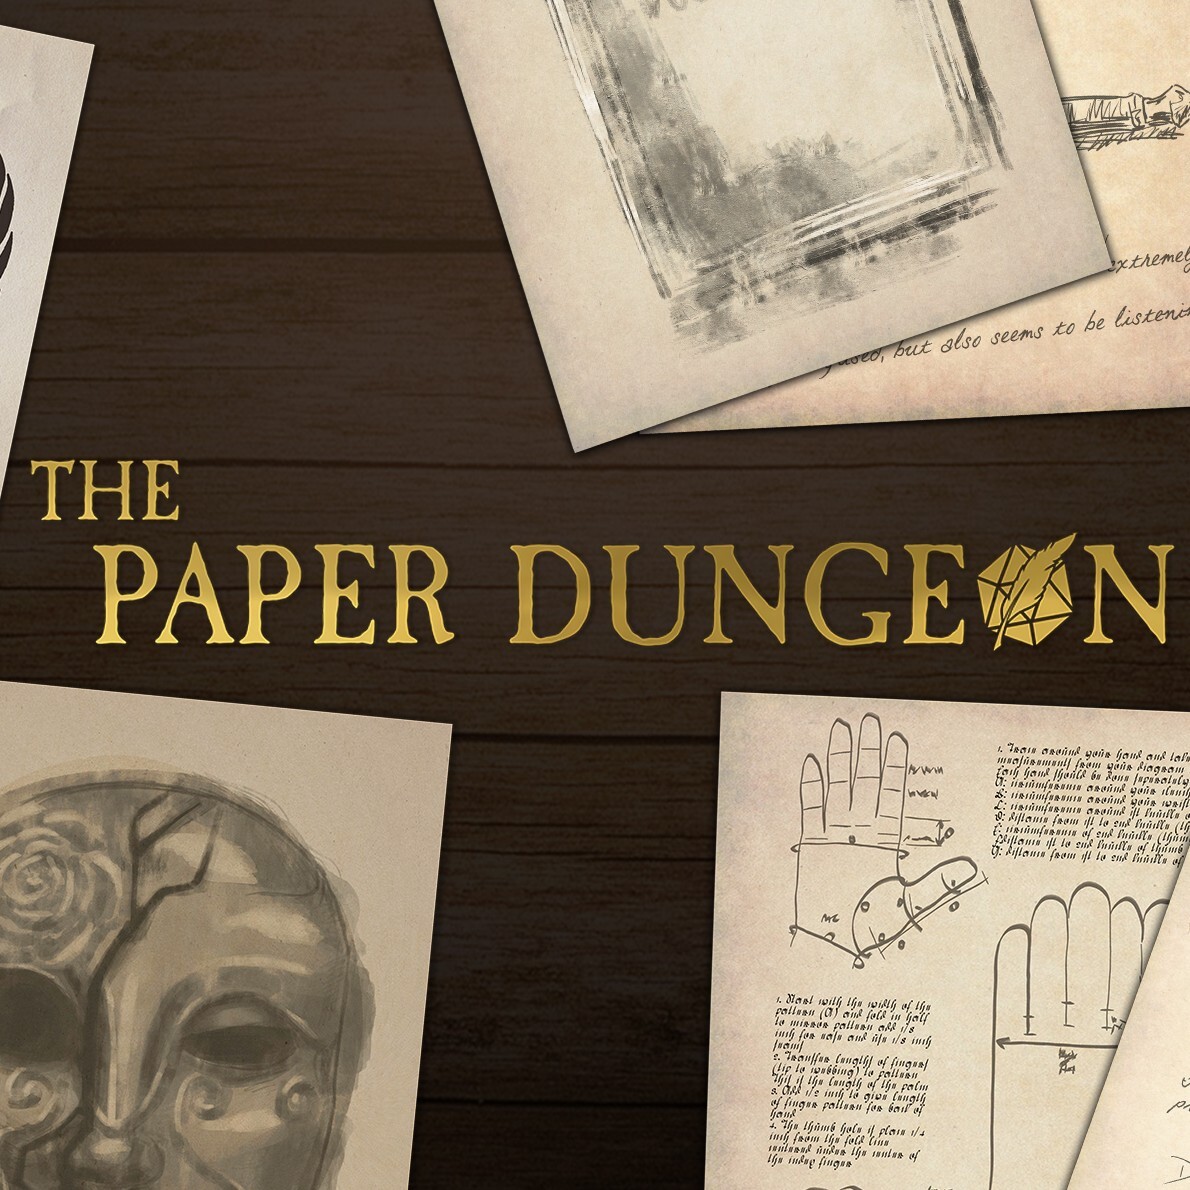 The Paper Dungeon Podcast